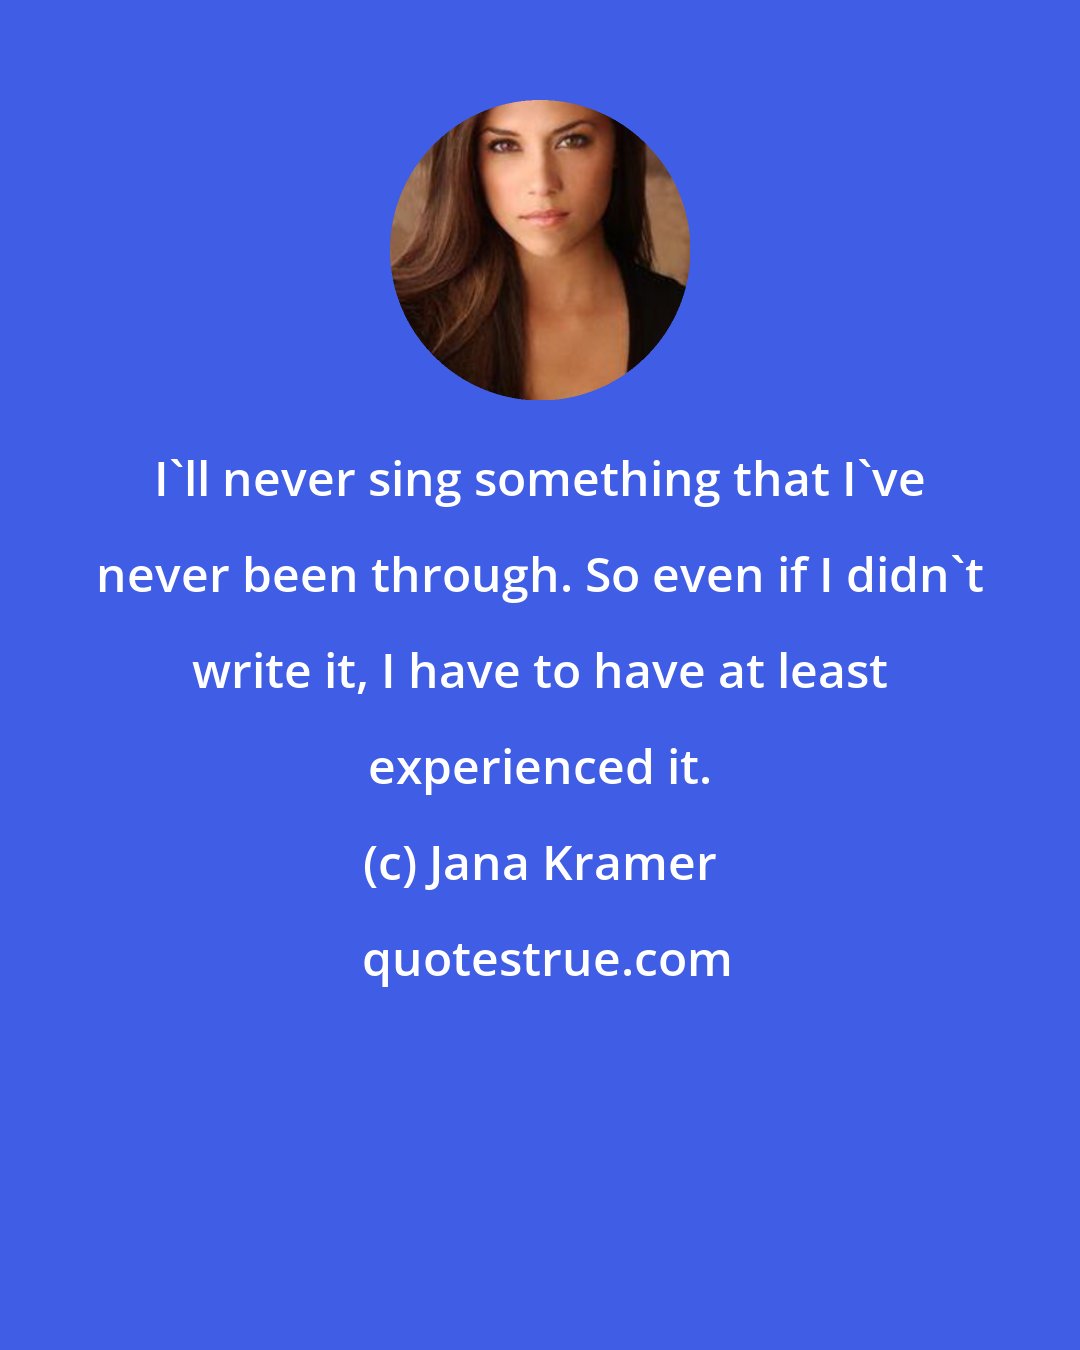 Jana Kramer: I'll never sing something that I've never been through. So even if I didn't write it, I have to have at least experienced it.